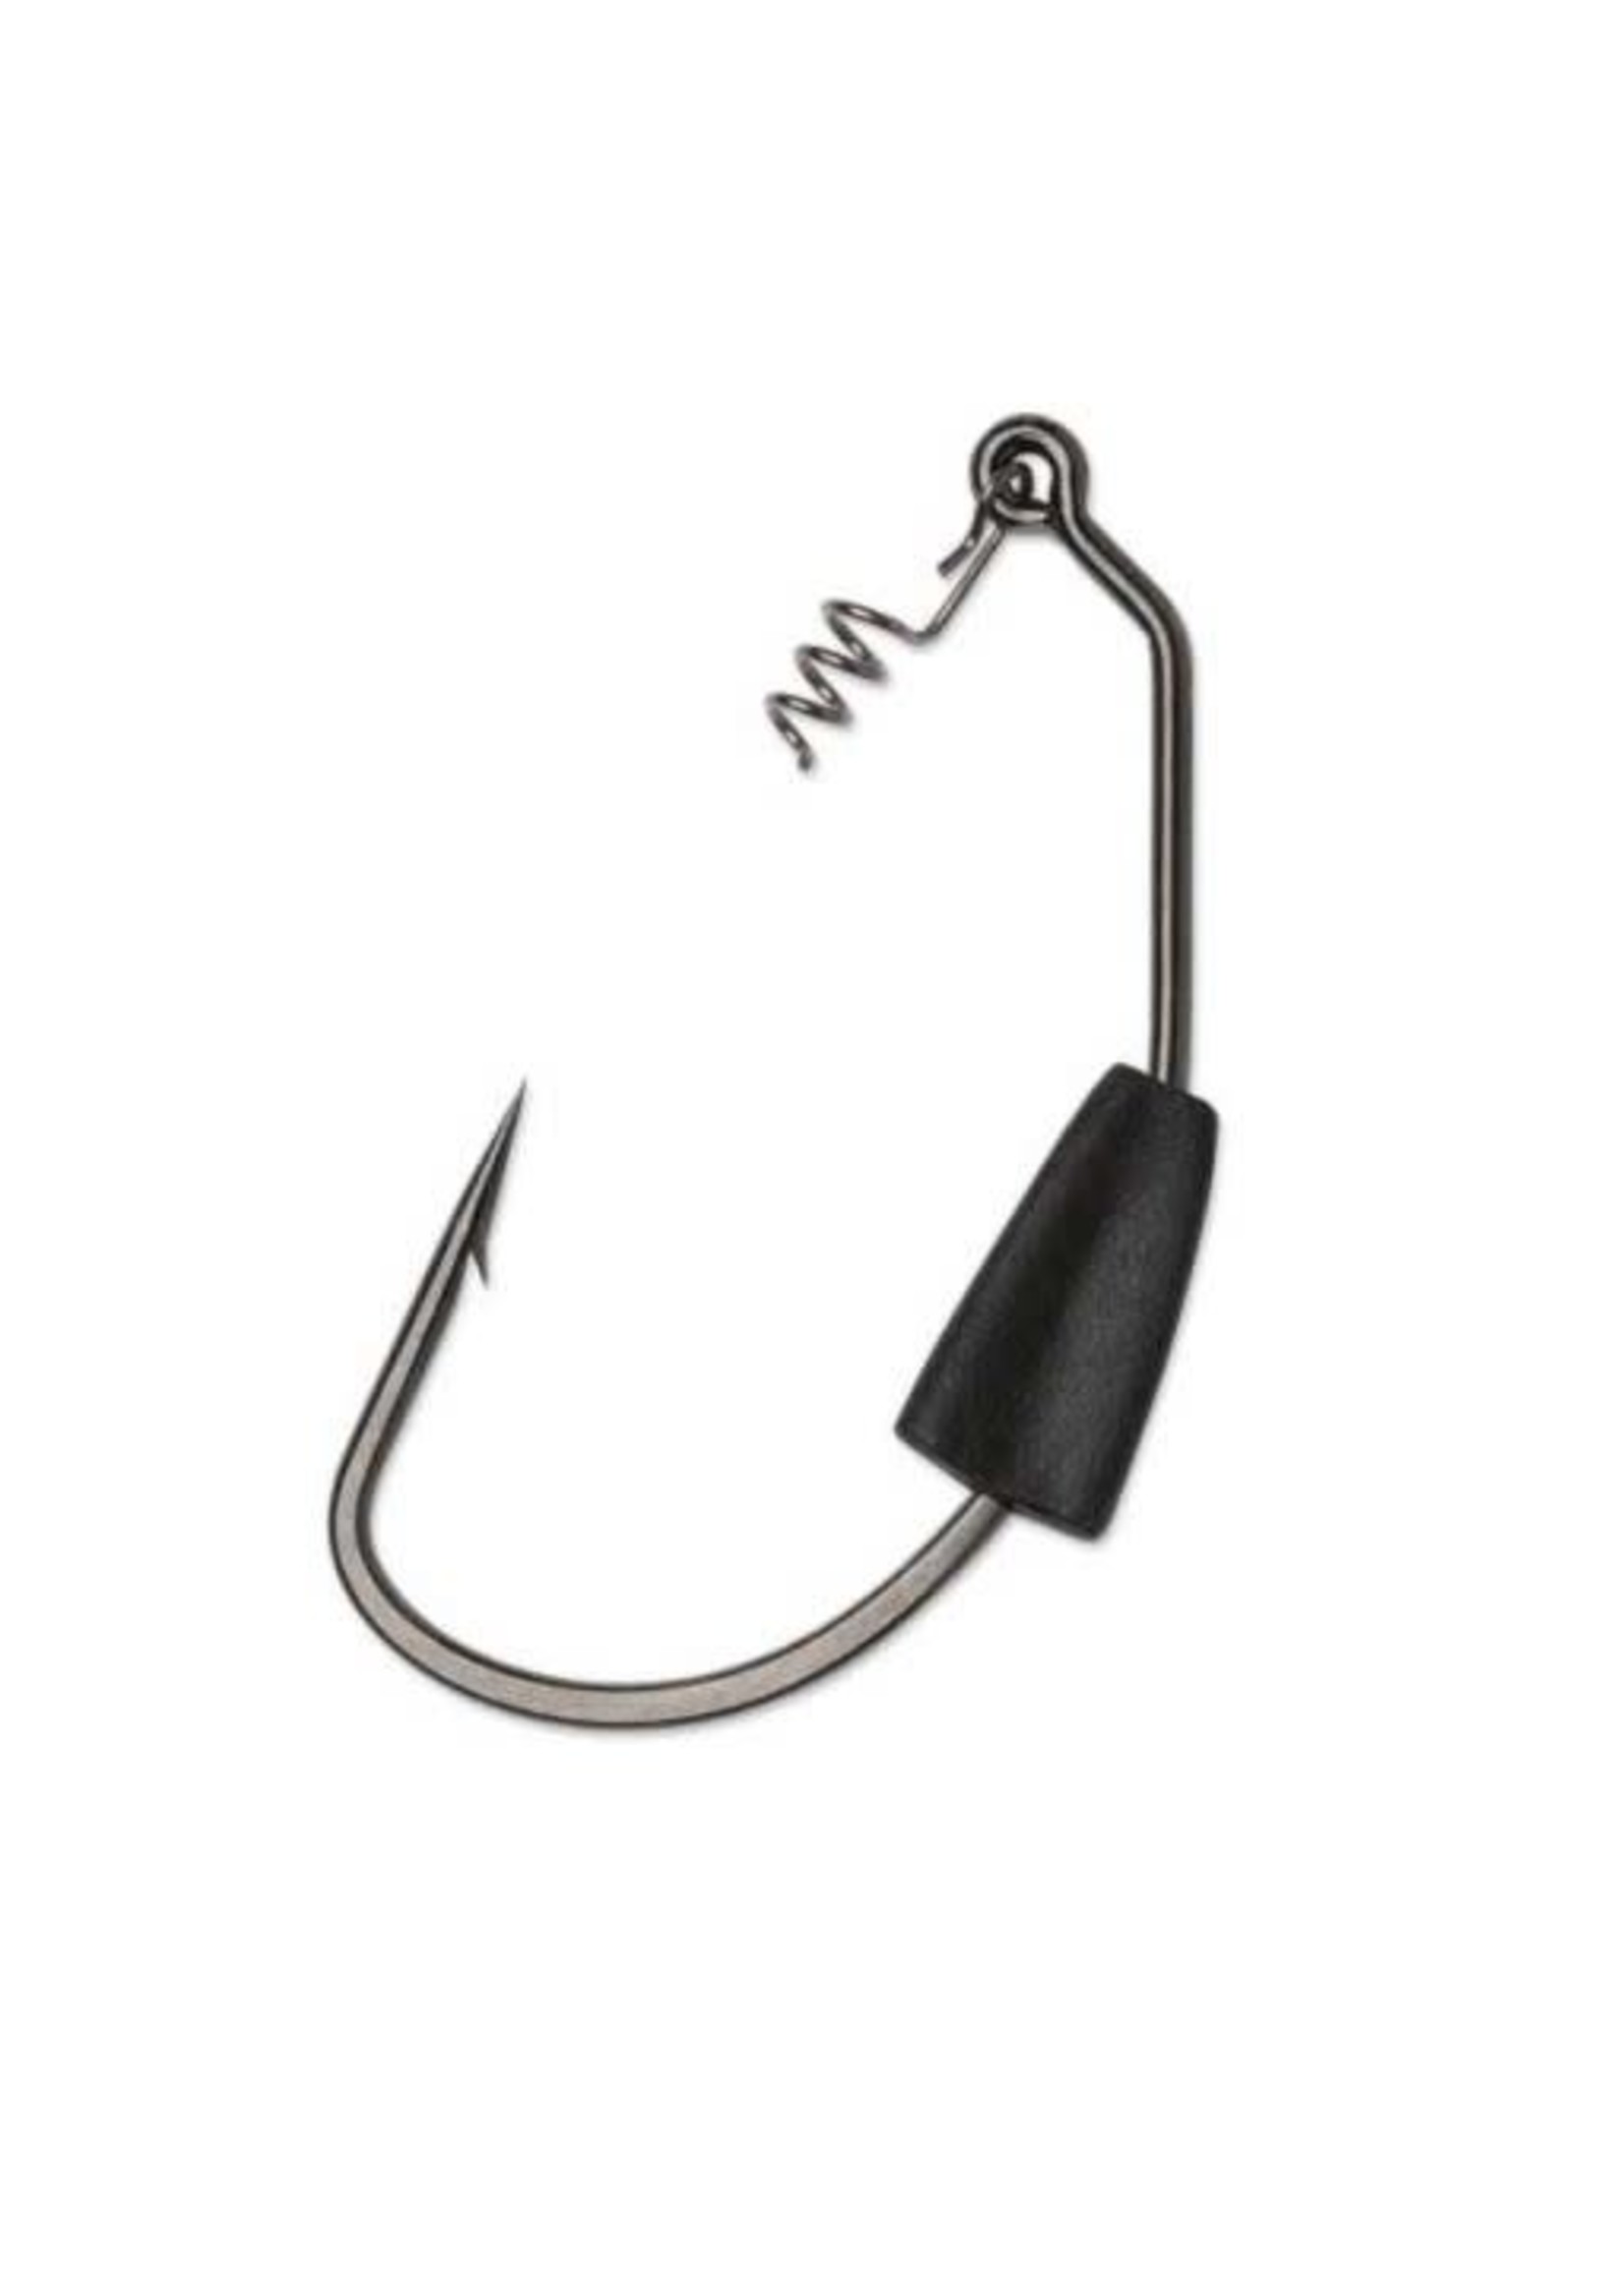 VMC Heavy Duty Weighted Swim Bait Hooks - 3/0 - Brothers Outdoors LLC